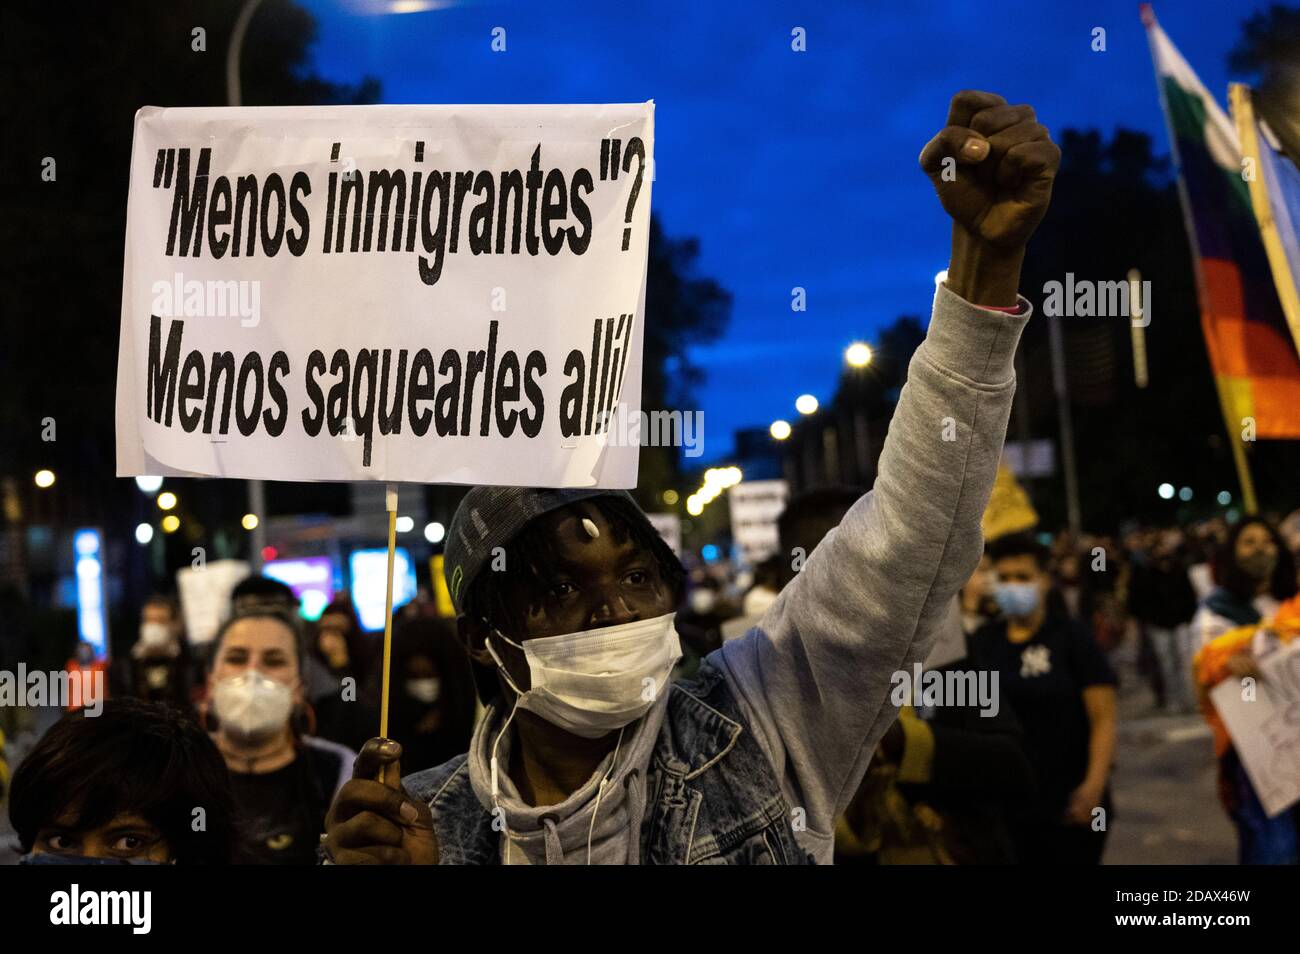 Madrid, Spain. 15th Nov, 2020. A man rising his fist carrying a placard reading 'Less migrants? less loot them' during a protest against racism and xenophobia. Credit: Marcos del Mazo/Alamy Live News Stock Photo